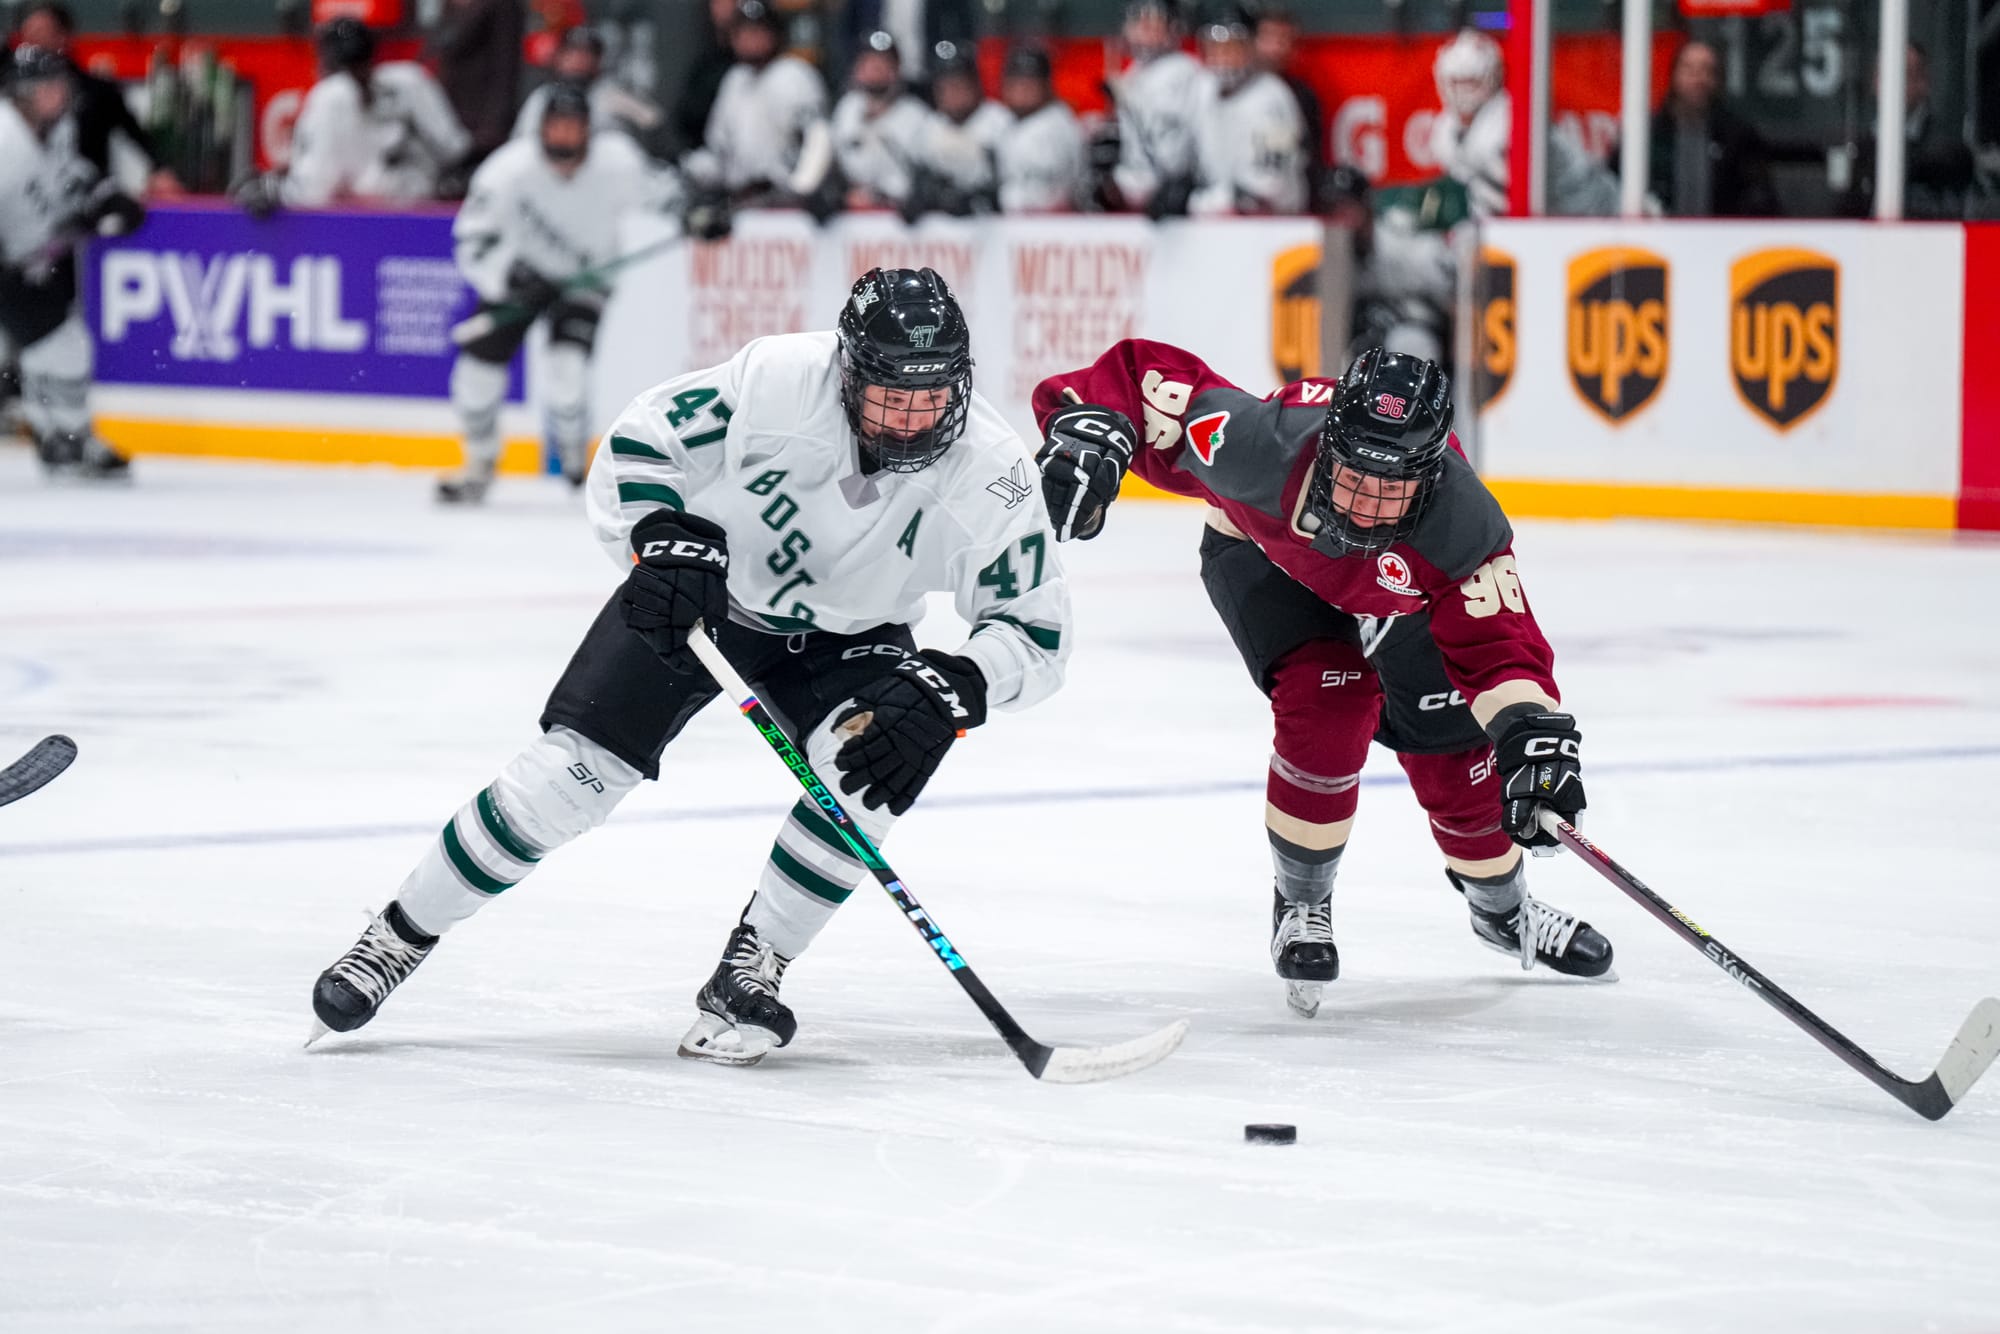 Jamie Lee Rattray protects the puck from Dominika Lásková. Rattray is in a white away uniform, while Lásková is in a maroon home uniform.